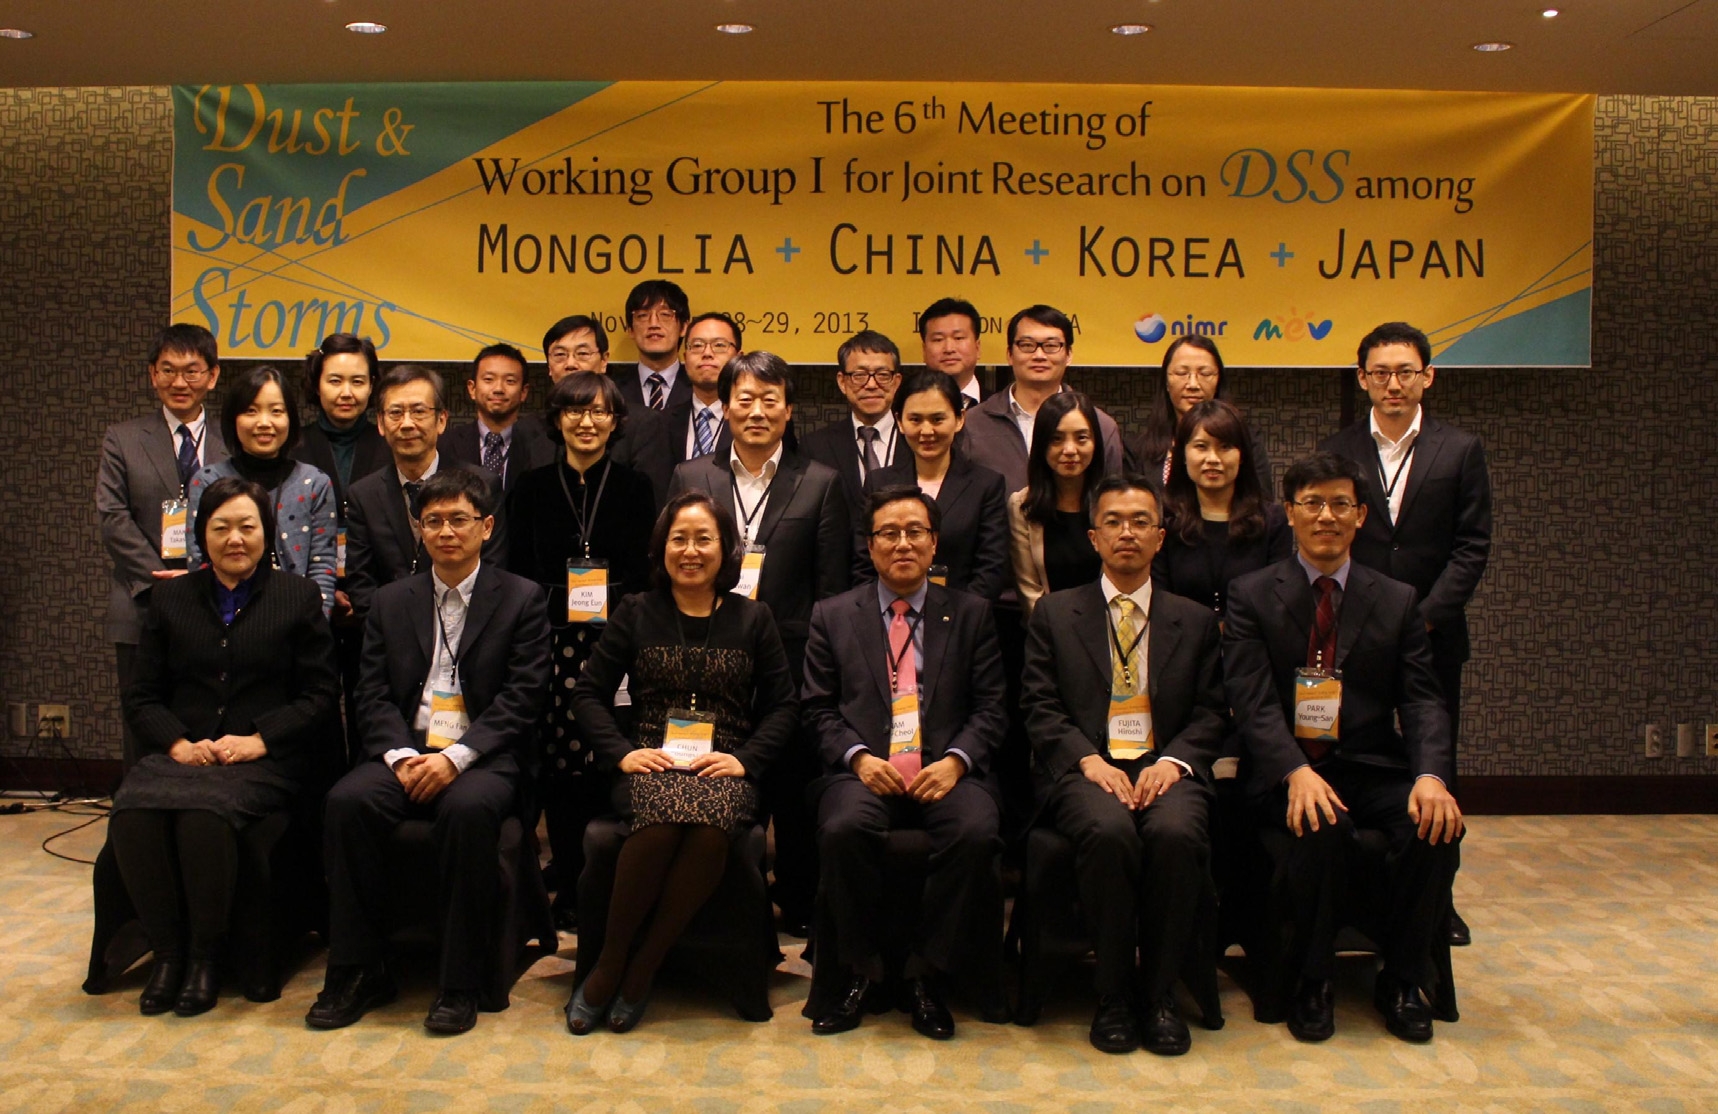 Fig. 4.2.2. The 6th meeting of Working Group I for Joint Research on DSS held in Songdo Sheraton hotel, Korea, on 28 and 29 November 2013